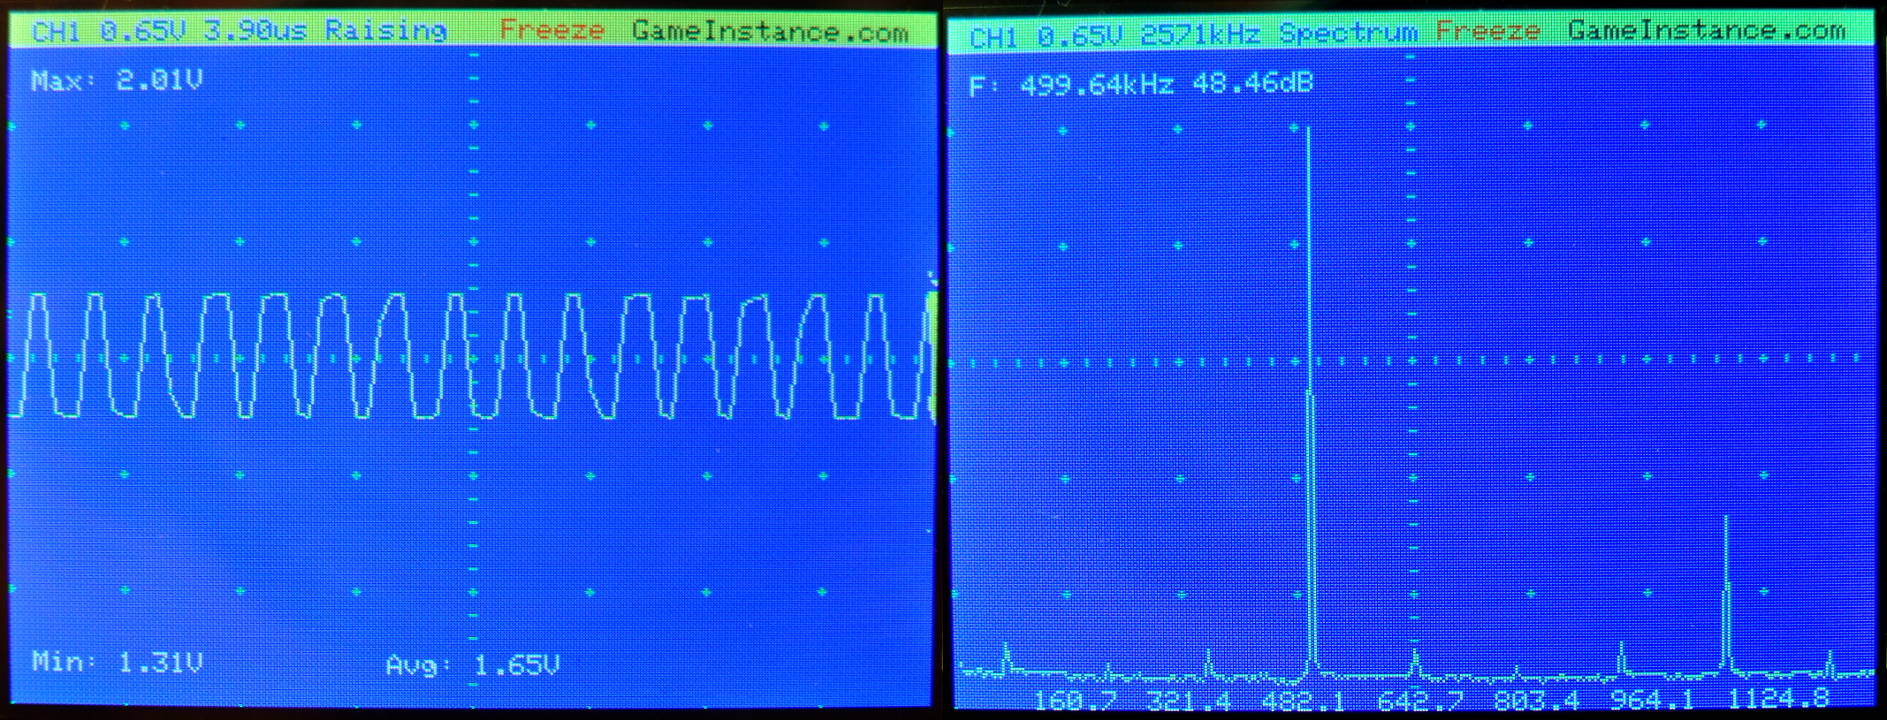 STM32 Oscilloscope - Representation of a 500 kHz square signal 50% duty cycle. 